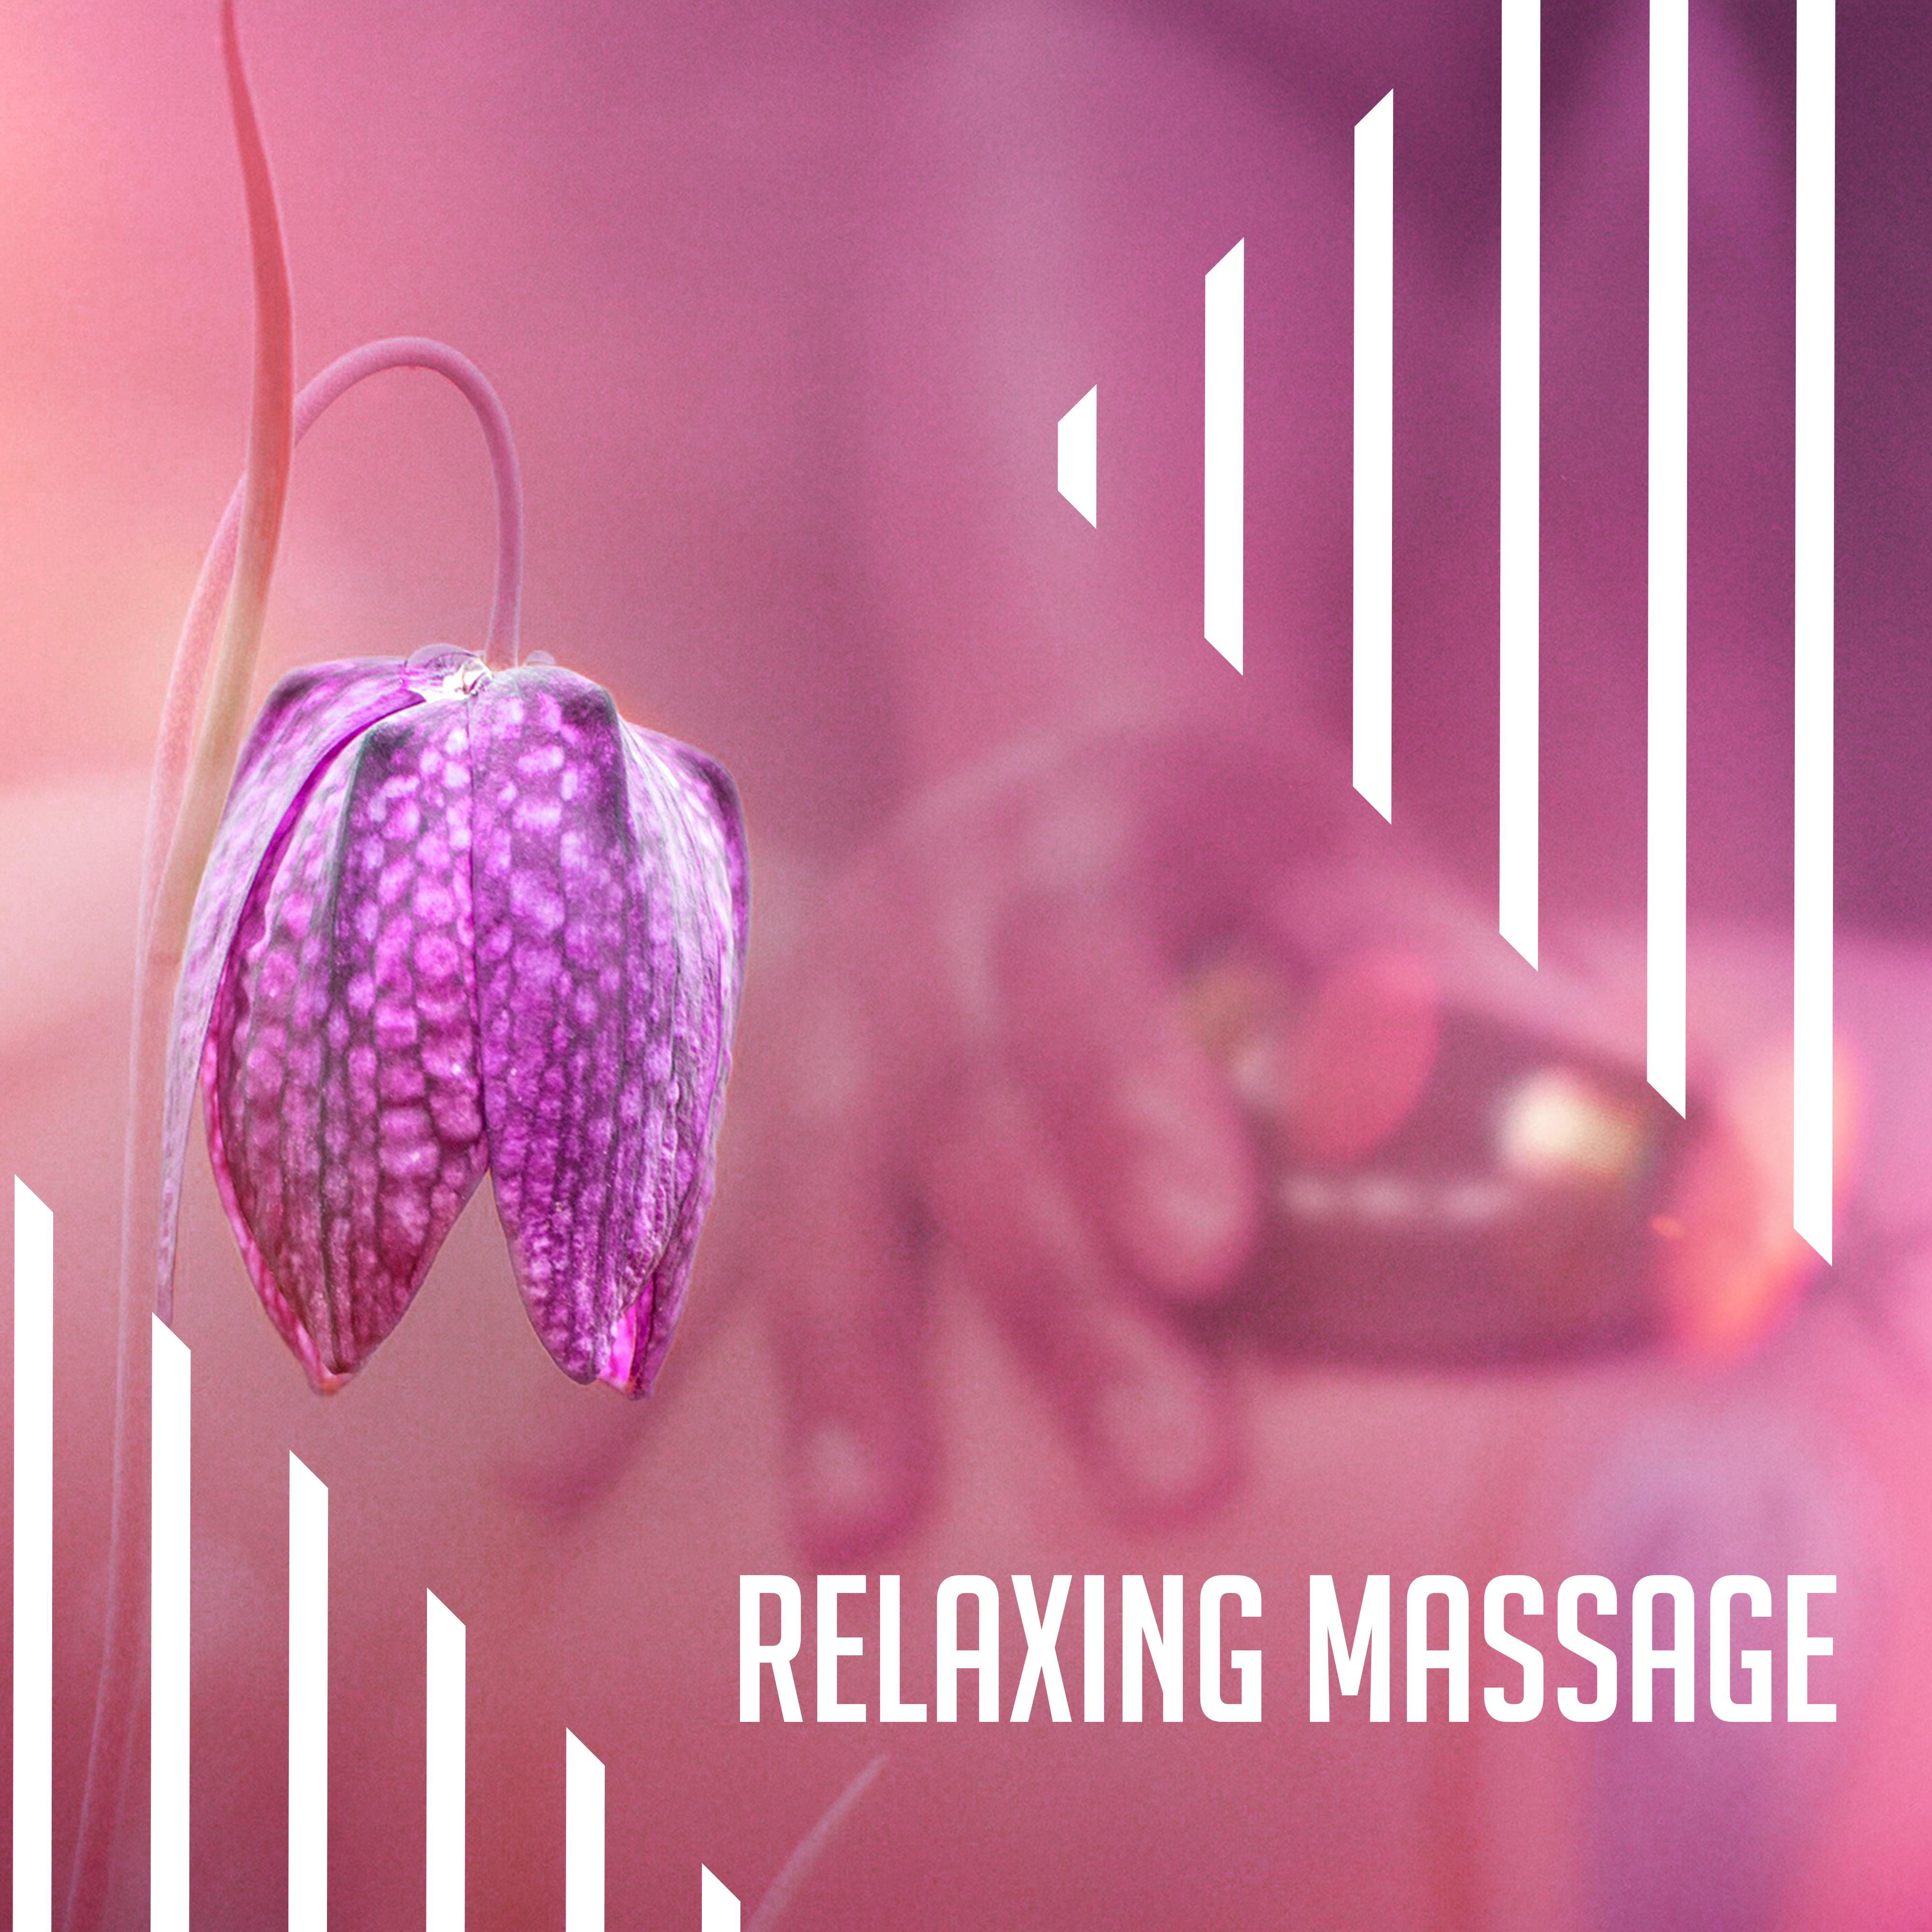 Relaxing Massage  New Age Music for Massage, Stress Relief, Relaxation Before Sleep, Healing Sounds of Nature